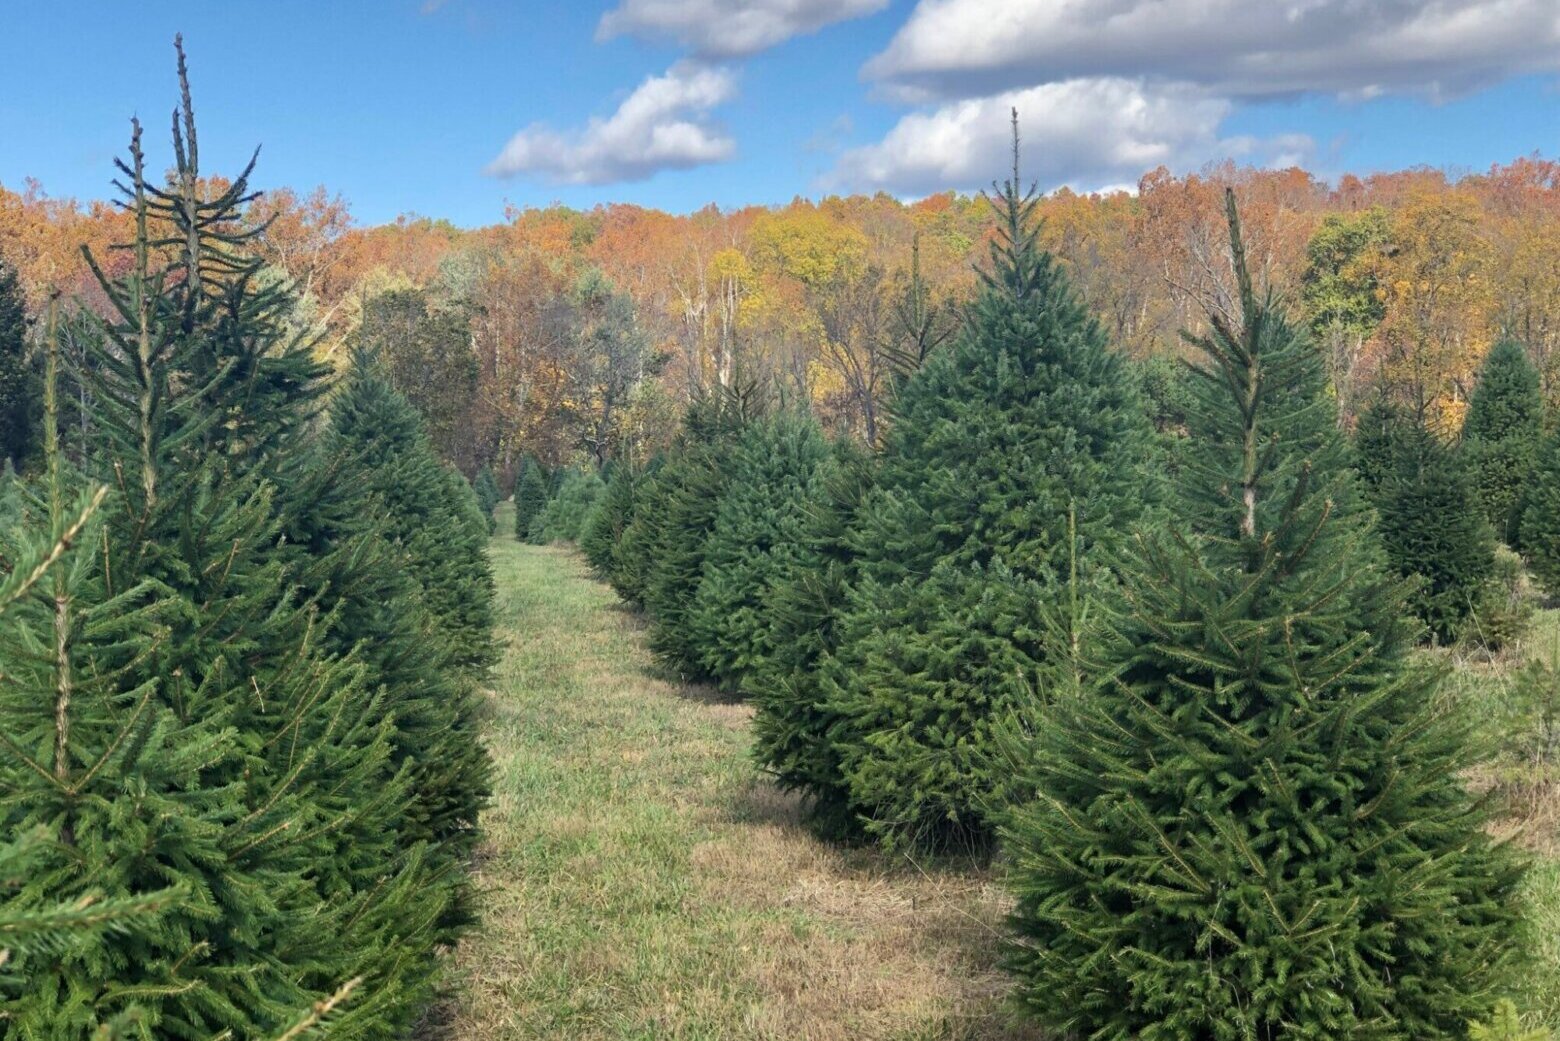 How Virginia’s Dept. of Forestry and Christmas tree growers spruced up the holidays – WTOP News